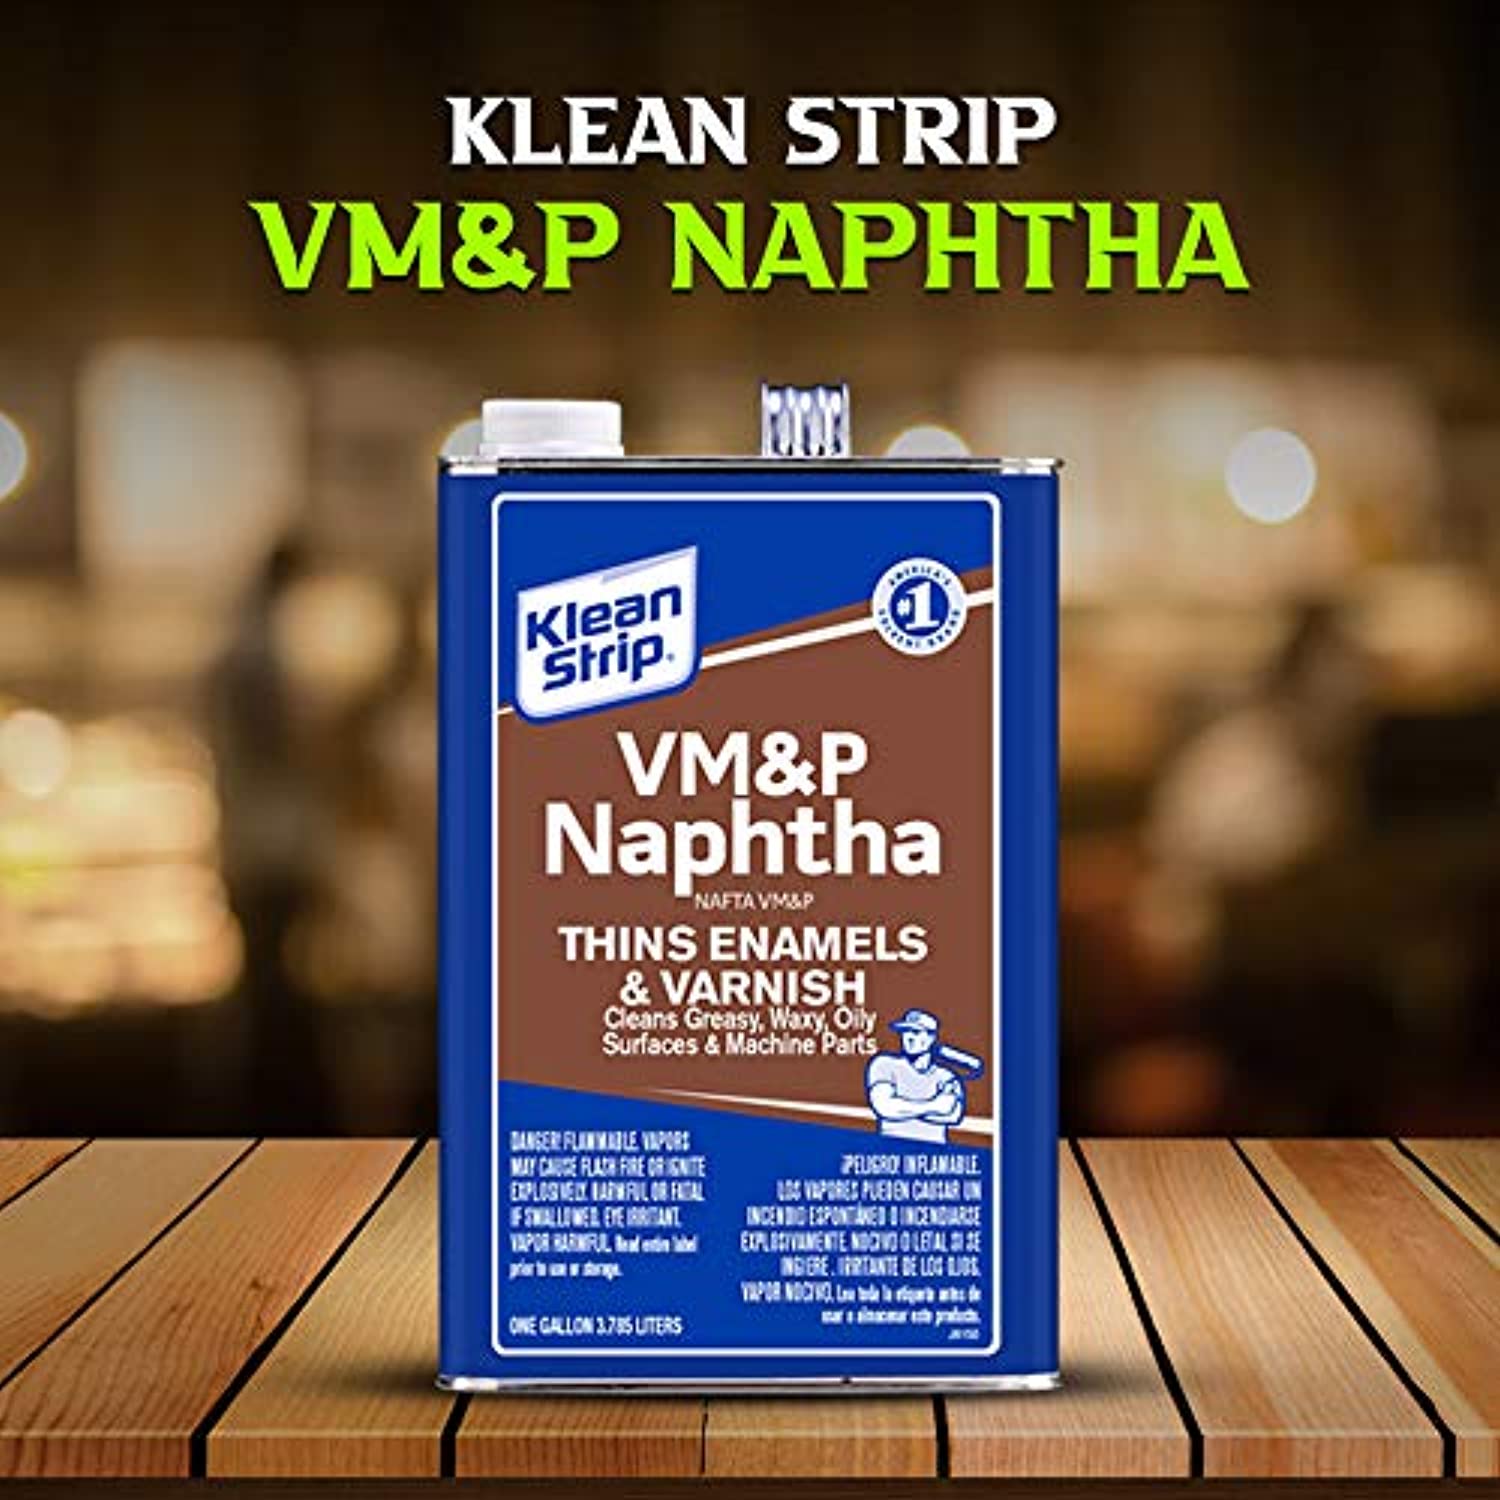 Klean-Strip VM&P Naphtha Thins Enamels & Varnish Cleans Greasy, Waxy, Oily Surfaces & Machine Parts Faster Drying Now Comes with Chemical Resistant Gloves by Centaurus AZ, 1Gal (3.785L)